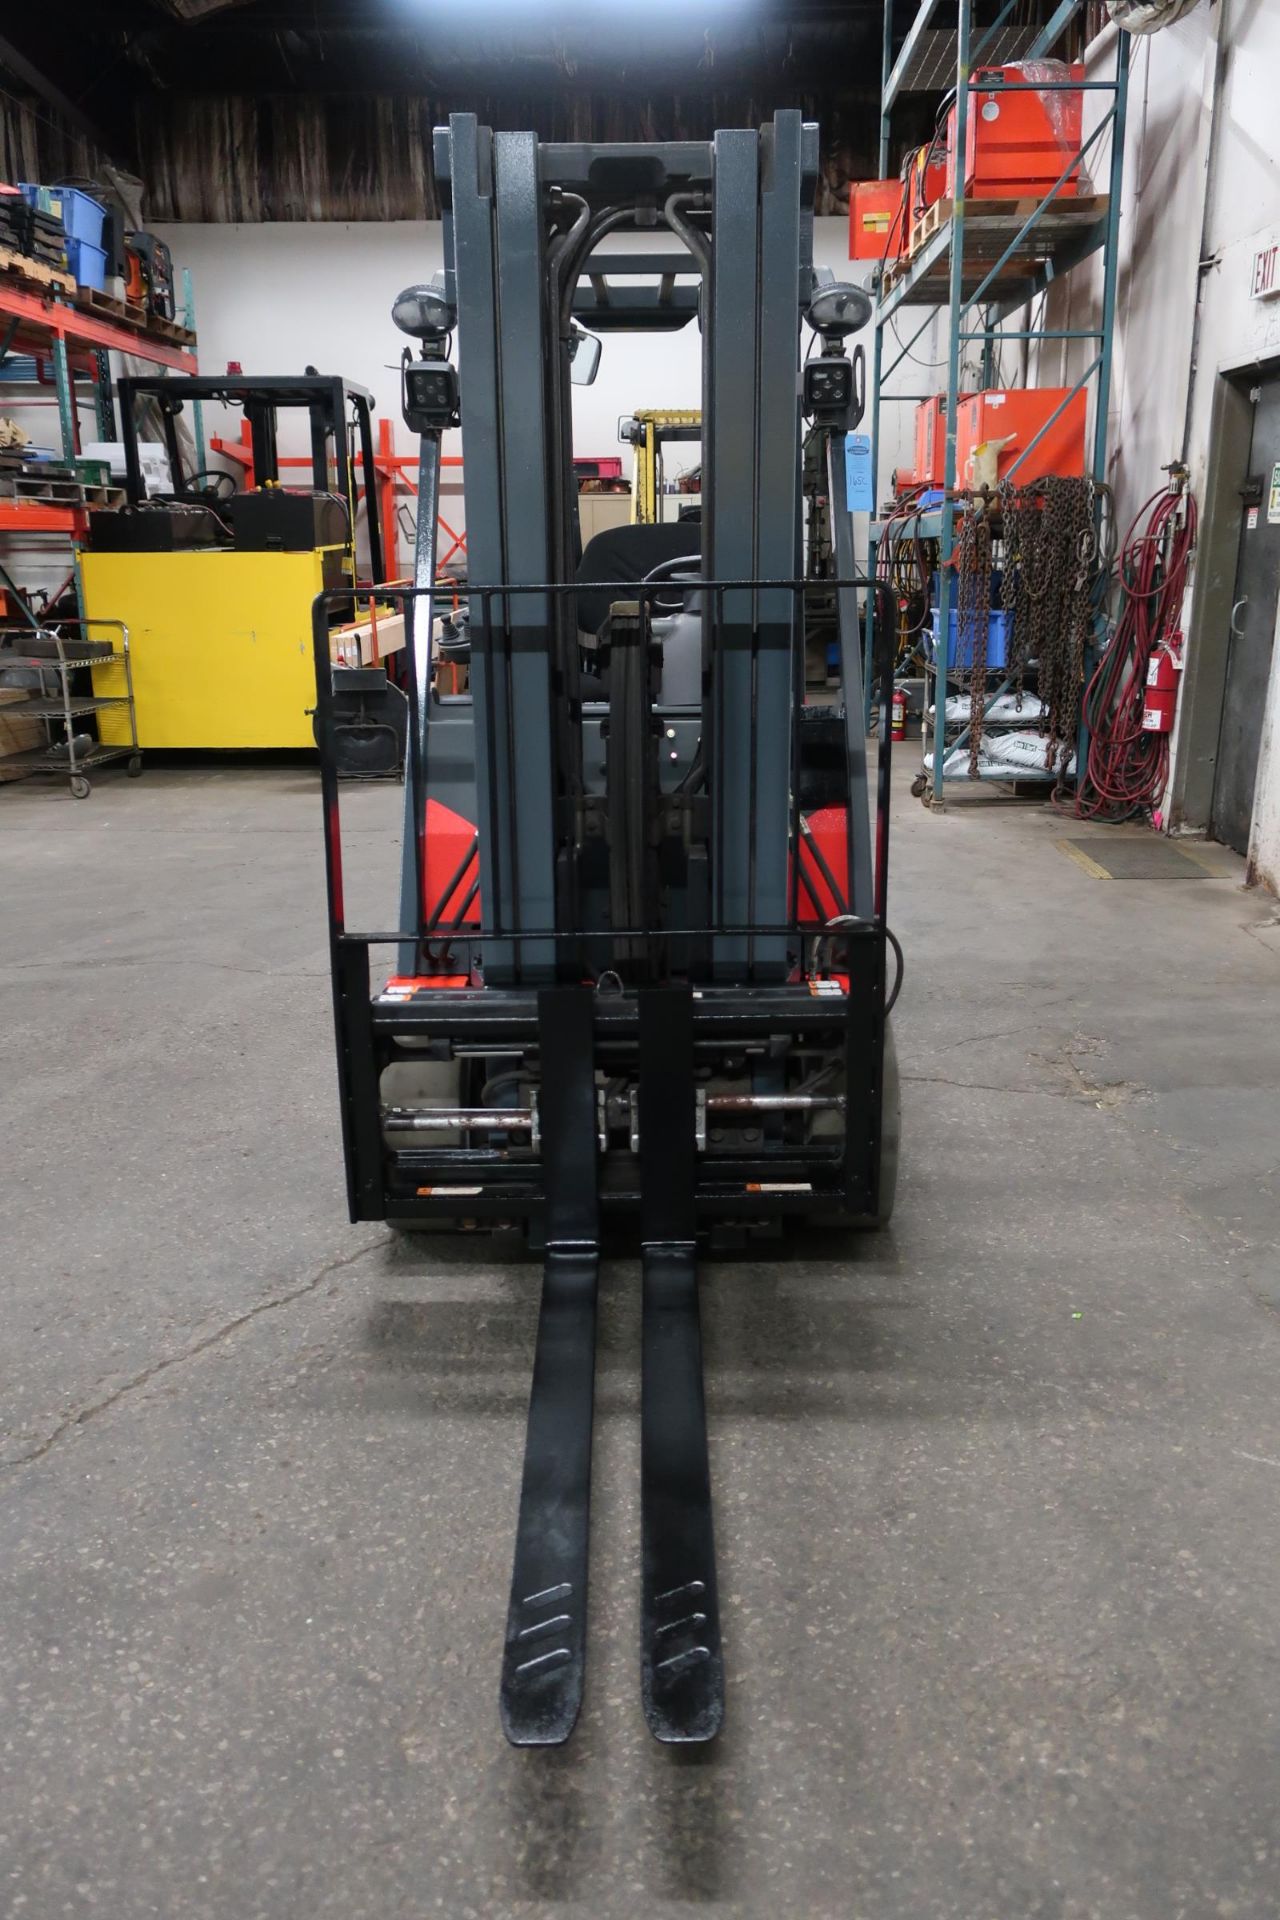 FREE CUSTOMS DOCS & 0 DUTY FEES - 2014 Linde 5250lbs Capacity Forklift with sideshift - LPG - Image 2 of 2